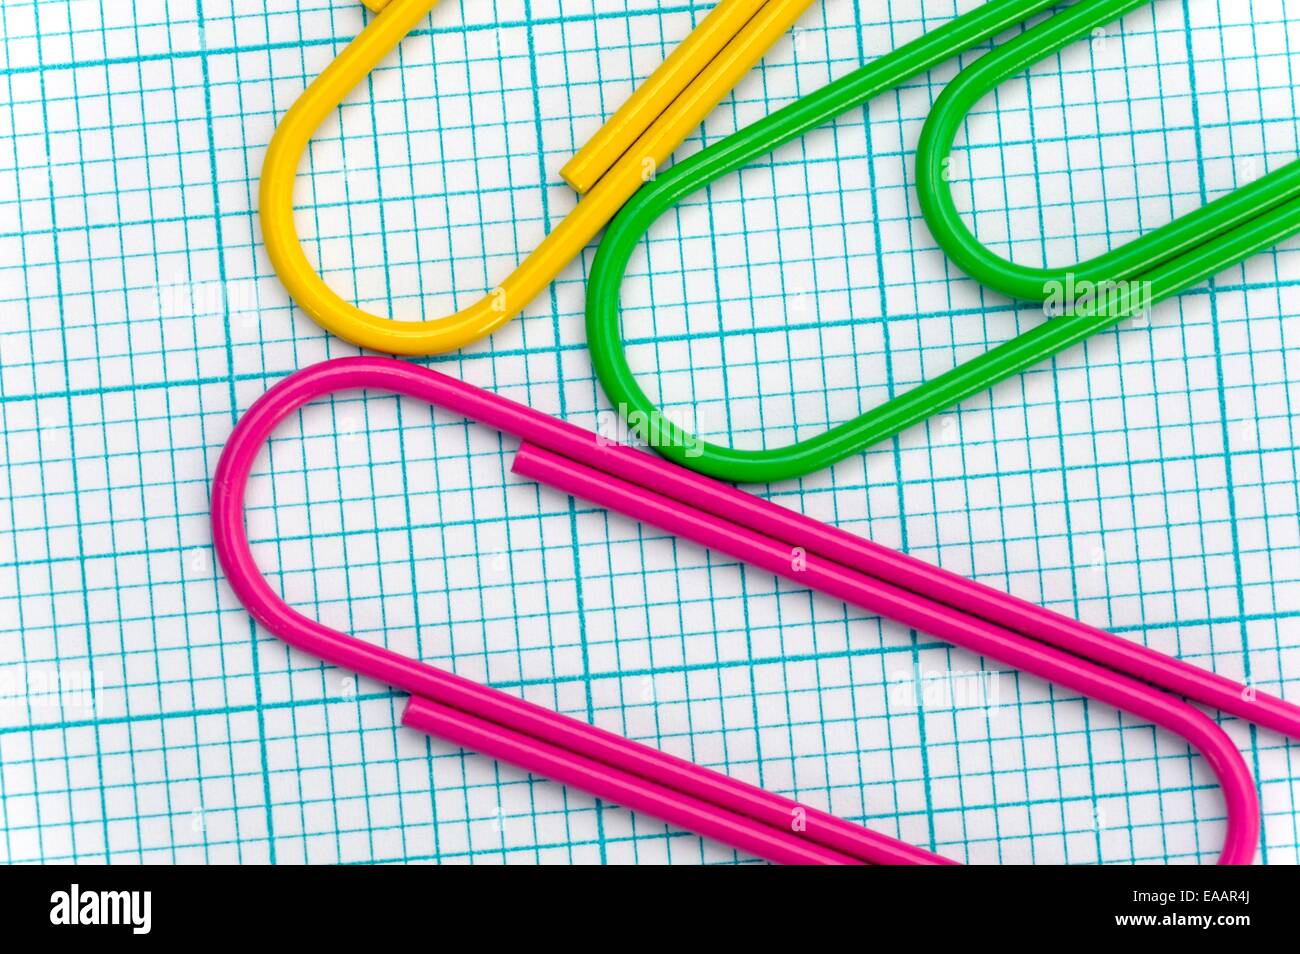 Giant paper clips arranged on a graph paper background Stock Photo